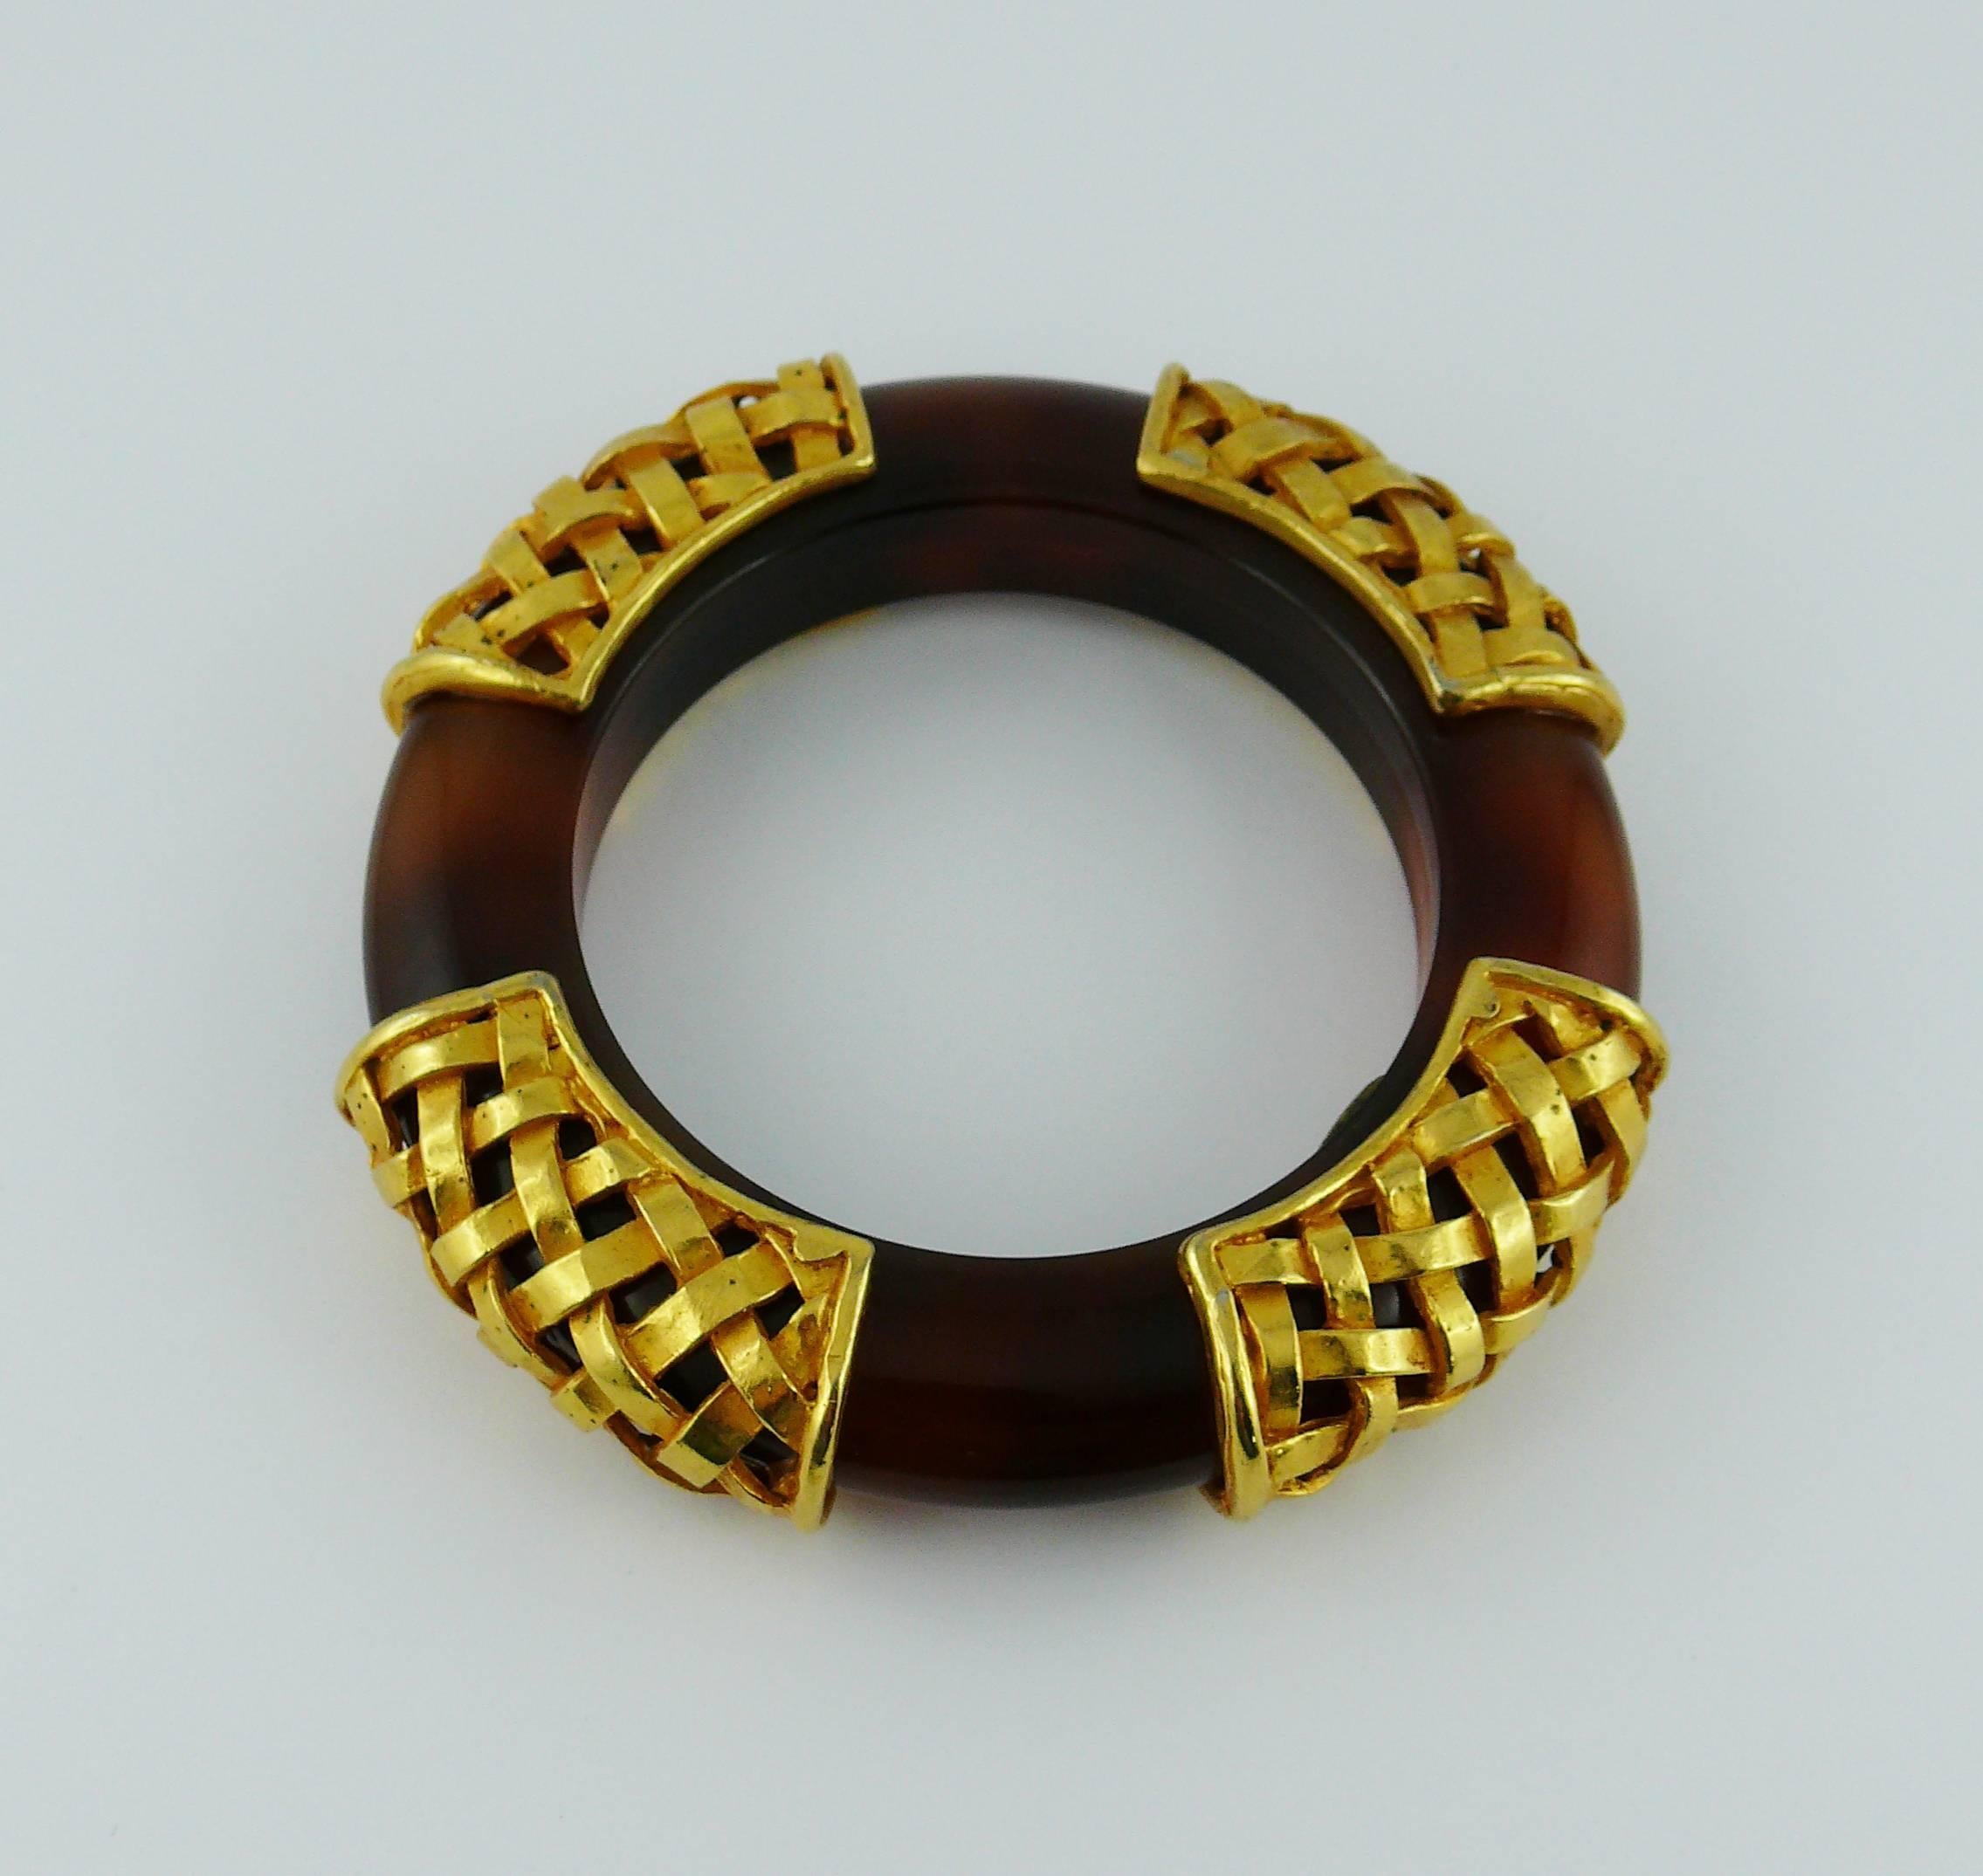 DOMINIQUE AURIENTIS vintage massive resin bangle decorated with four braided gold-tone caps.

Marked DOMINIQUE AURIENTIS Paris.

Indicative measurements : inner circumference approx. 19.79 cm (7.79 inches) / width approx. 1.2 cm (0.47